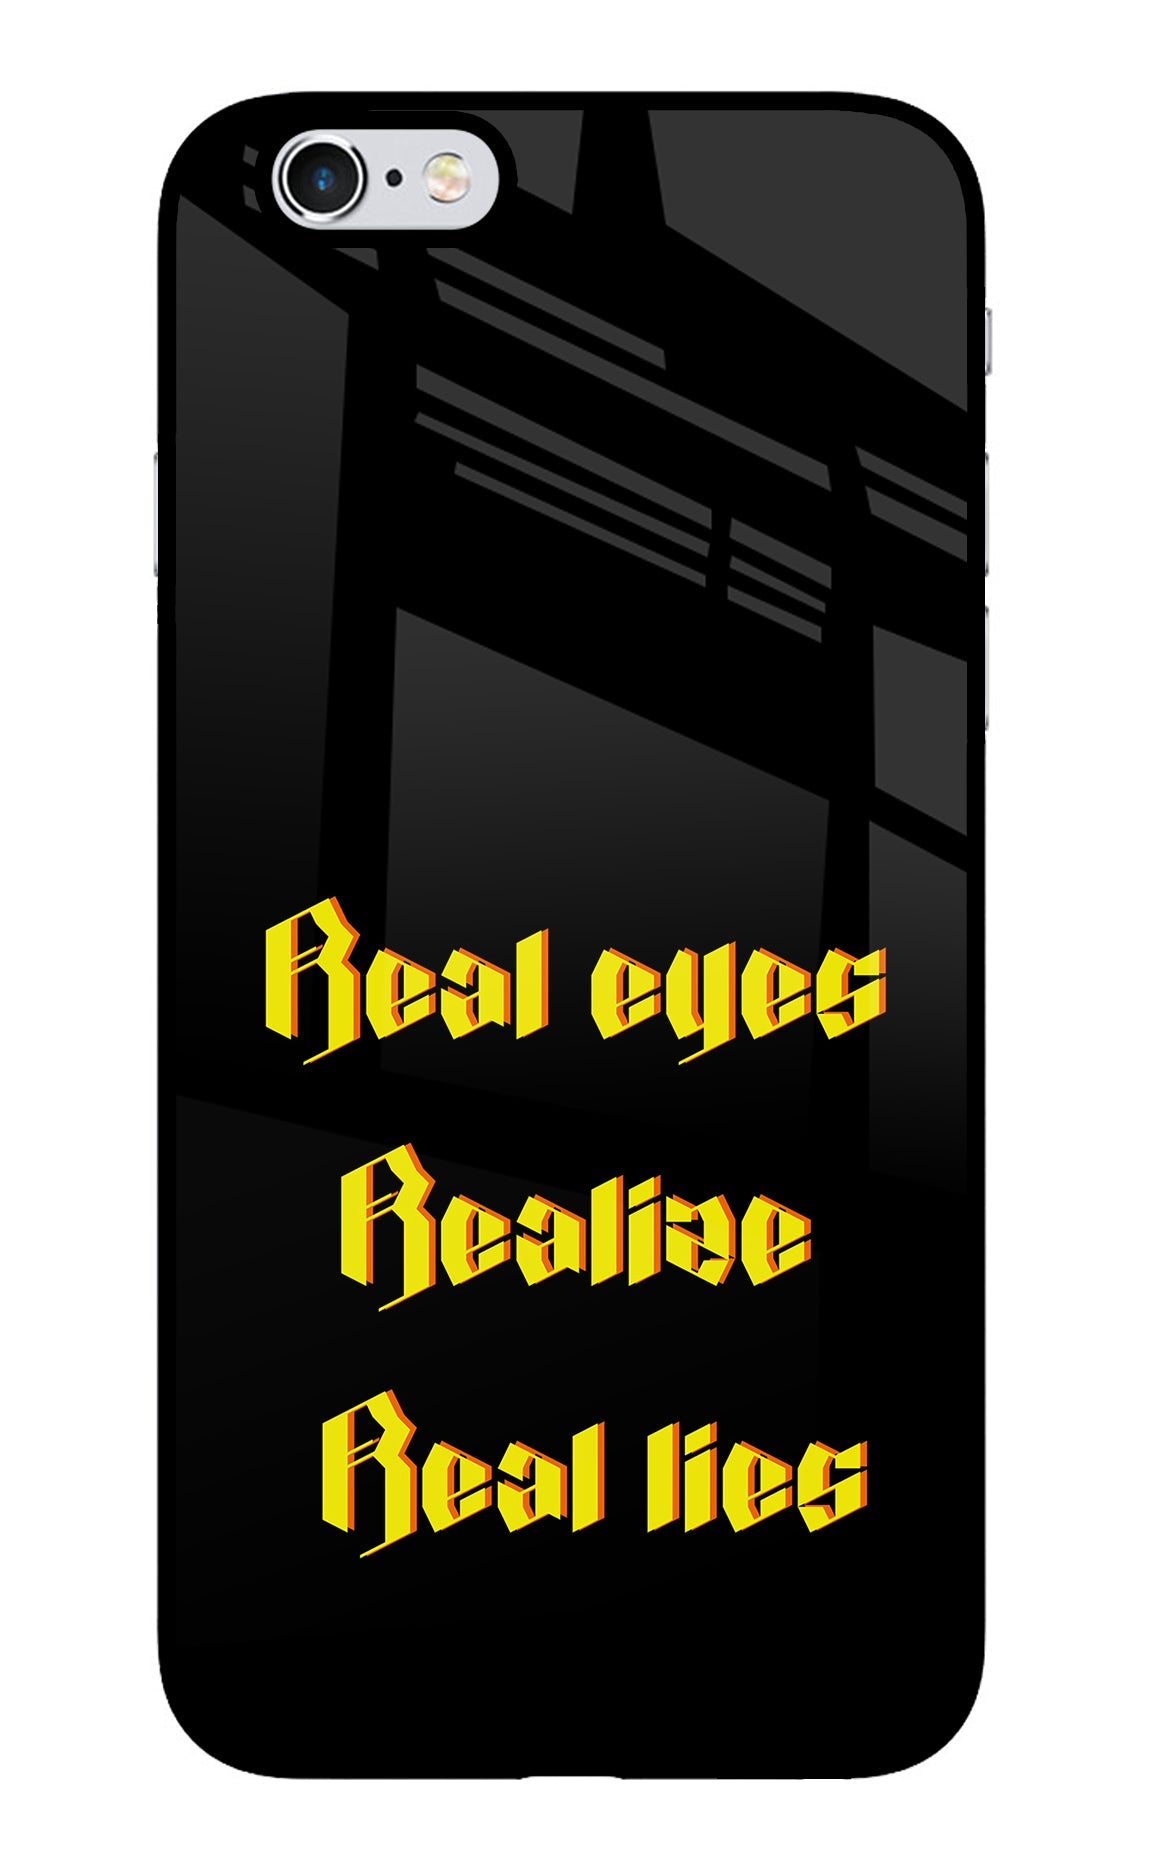 Real Eyes Realize Real Lies iPhone 6/6s Glass Case